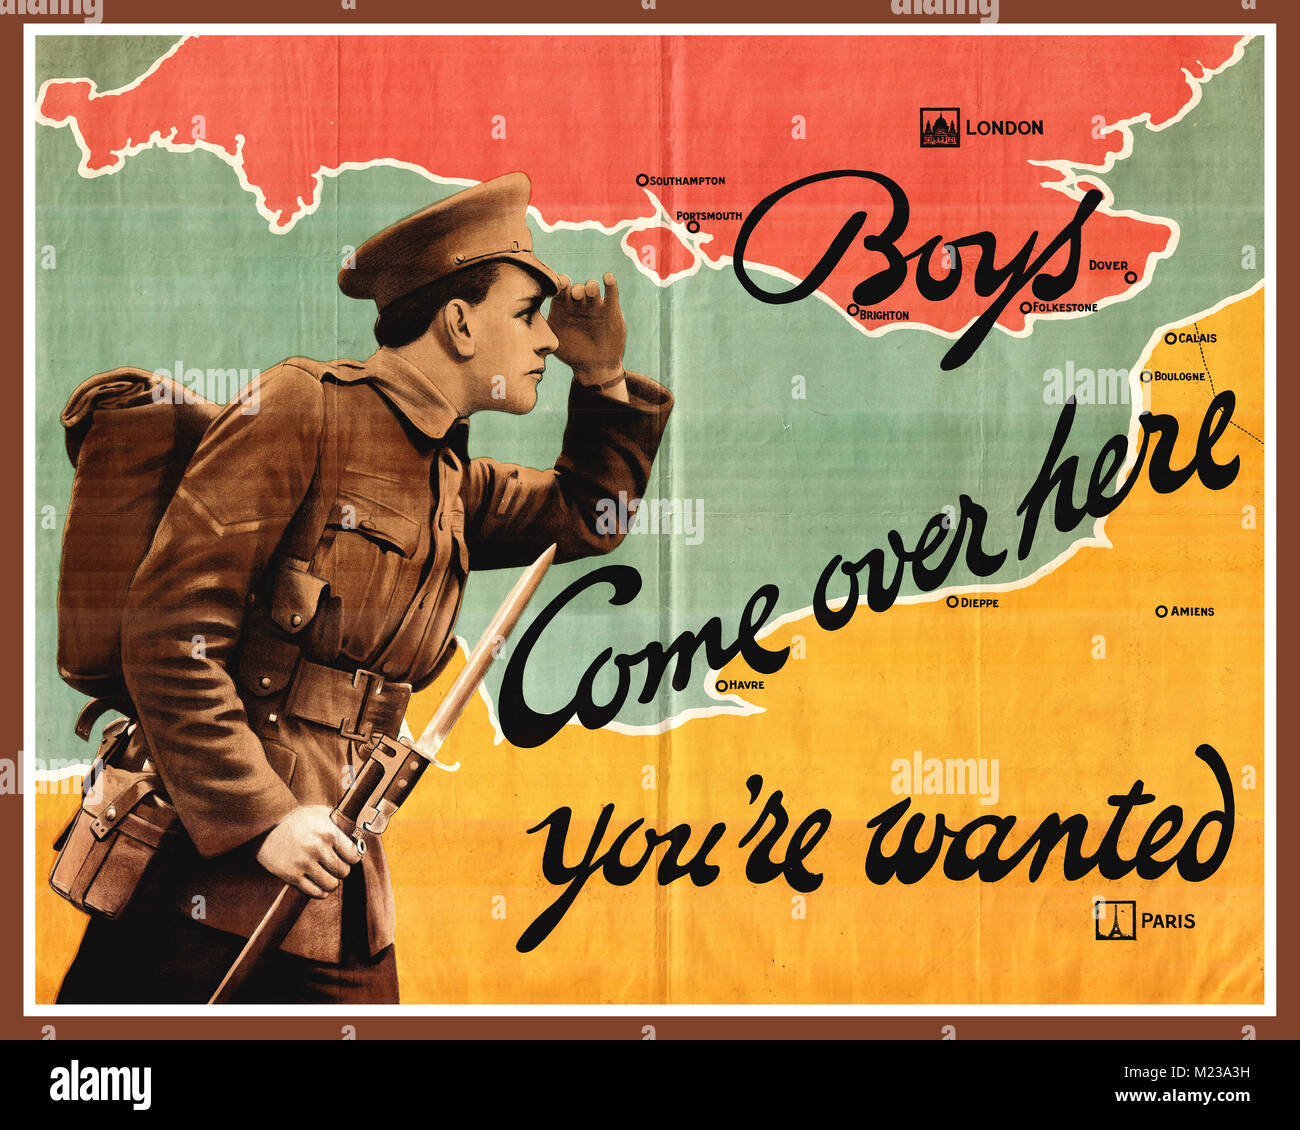 WW1 1900's Recruitment Propaganda Poster featuring a British soldier in full uniform in France come over you are wanted Stock Photo